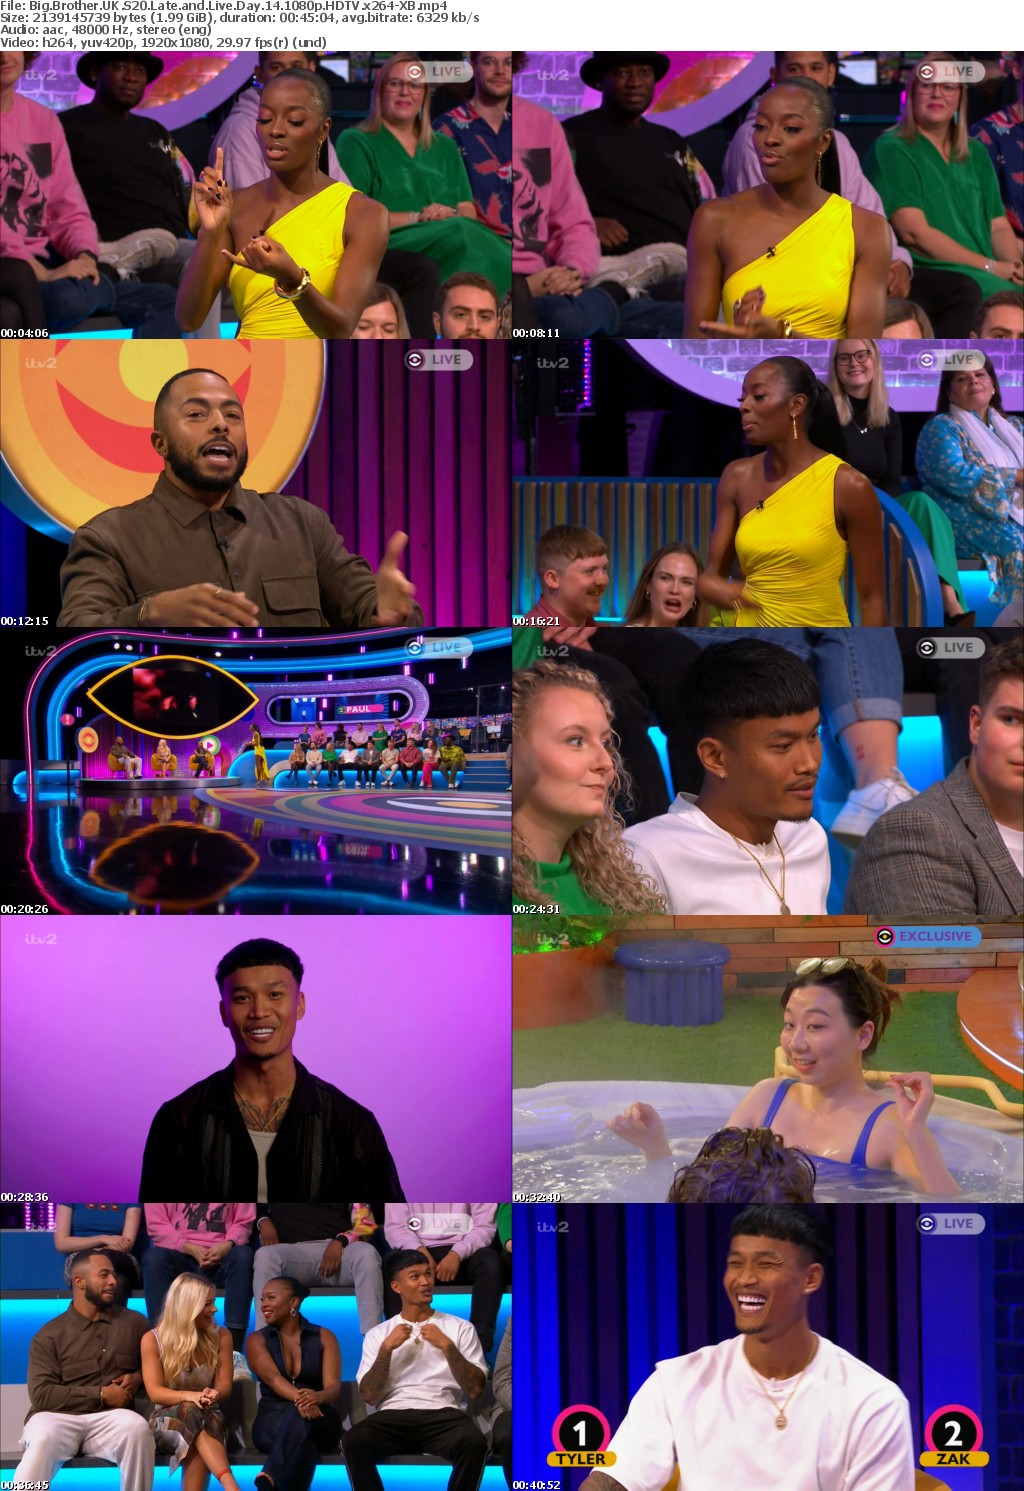 Big Brother UK S20 Late and Live Day 14 1080p HDTV x264-XB